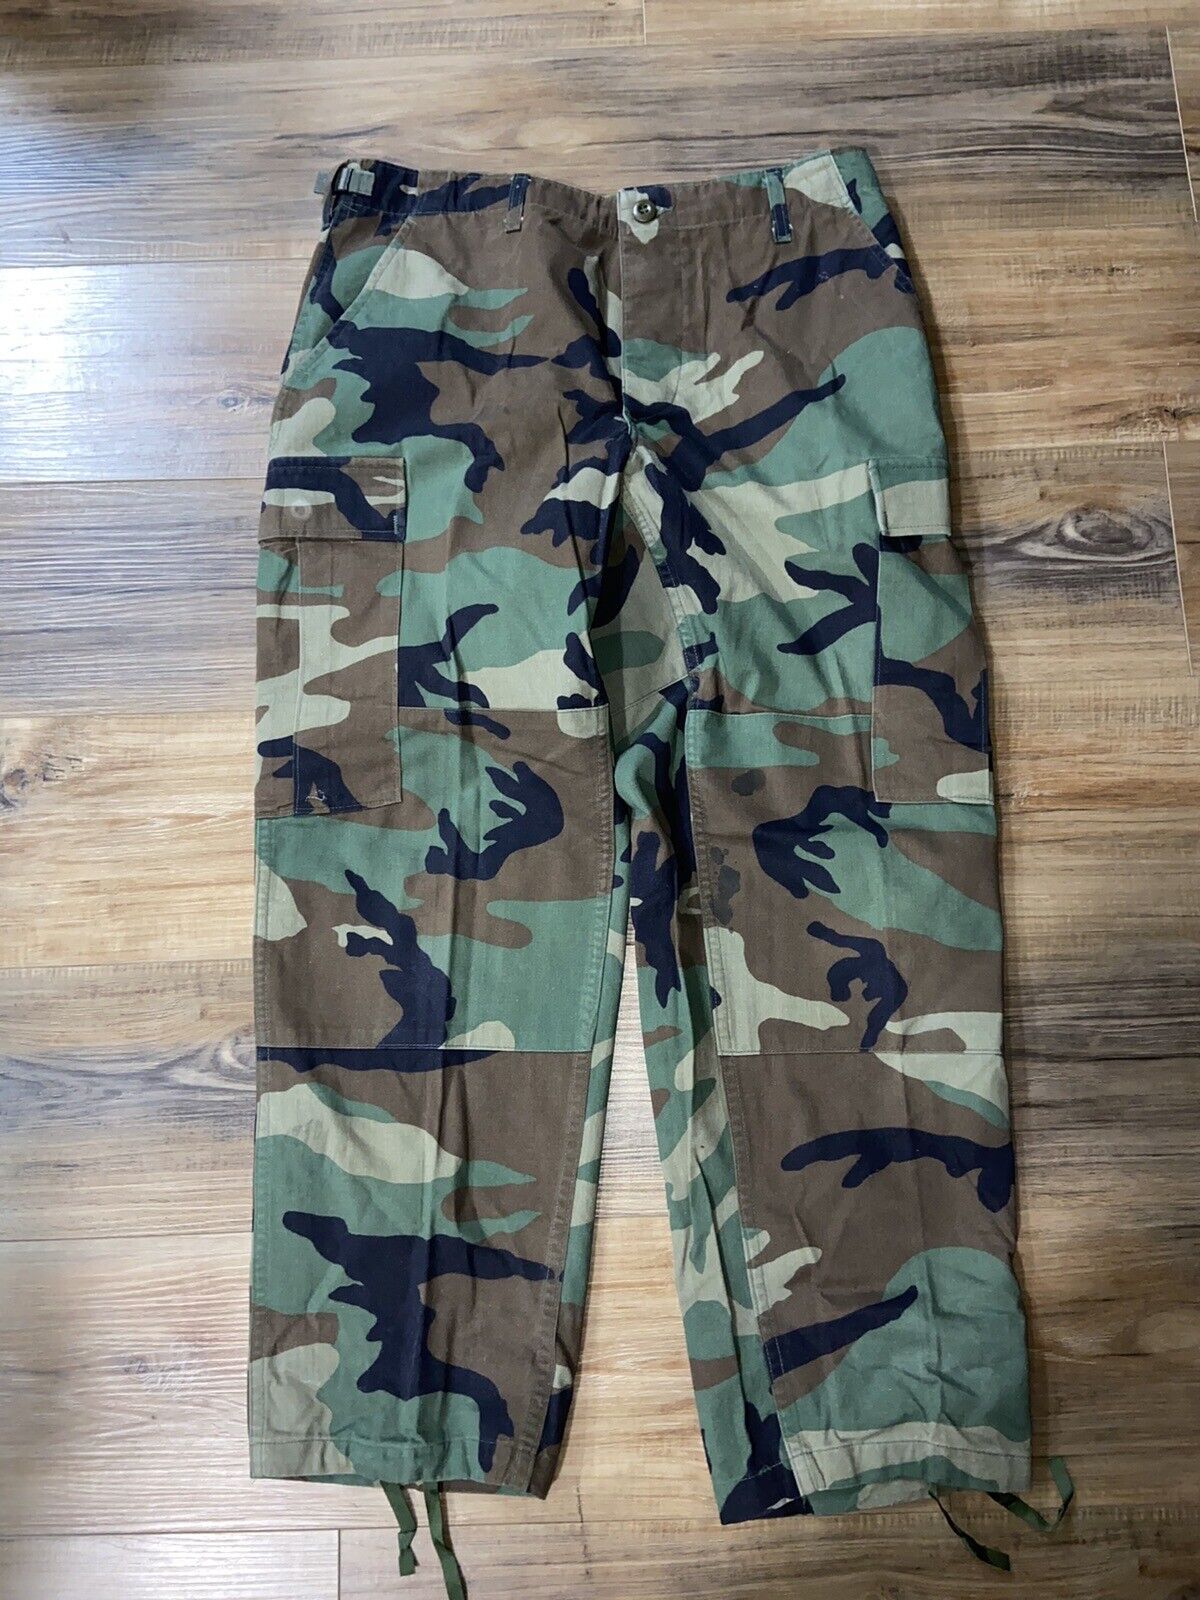 Trousers Army Camouflage Pattern 8415-01-084-1711 Size Medium – X-Short